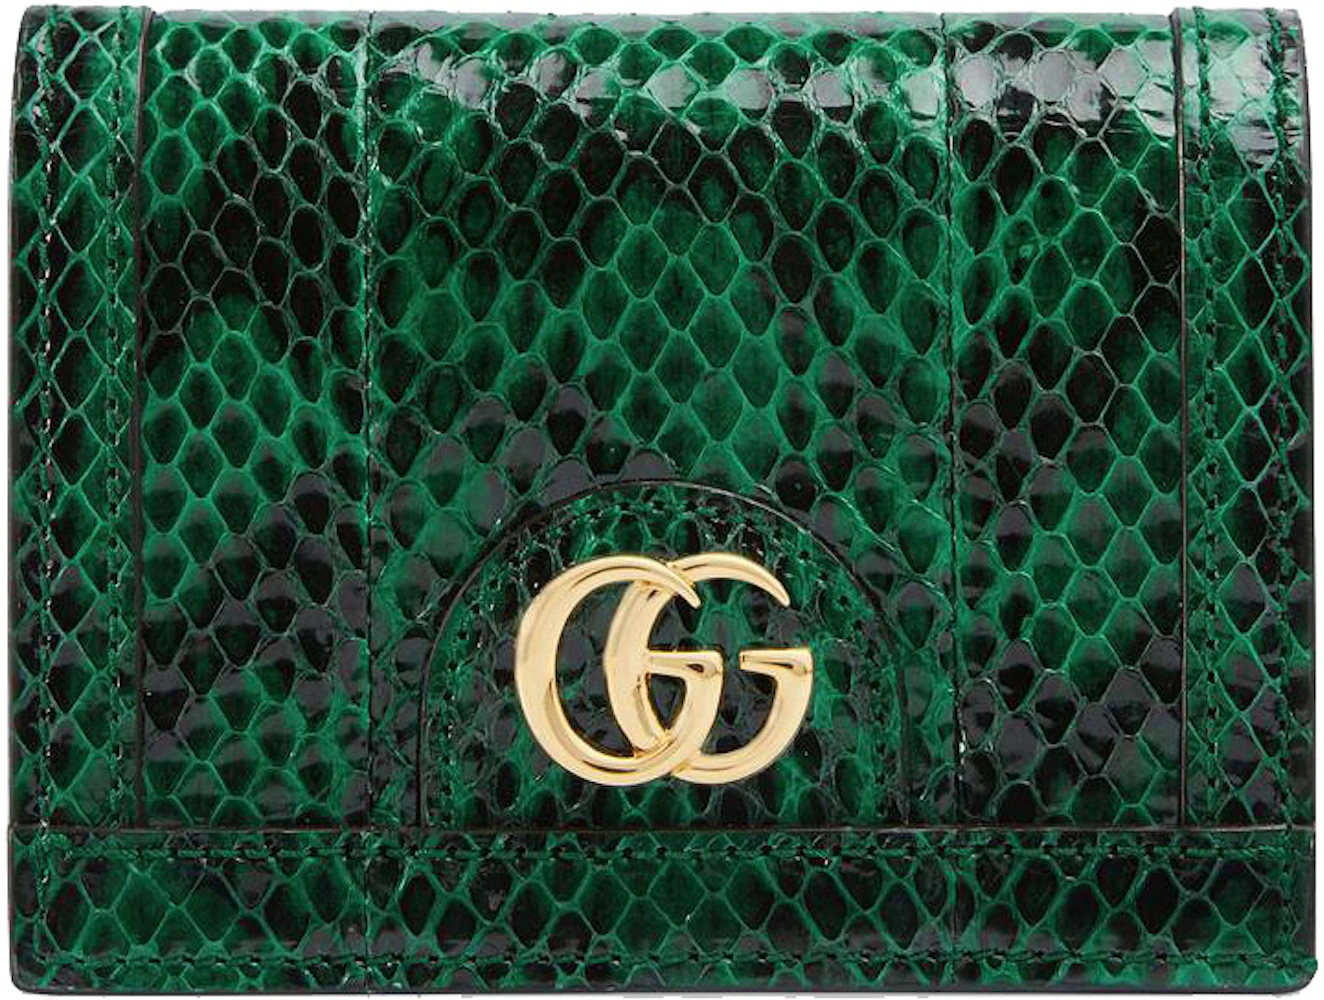 Gucci Ophidia Snake Skin Card Case